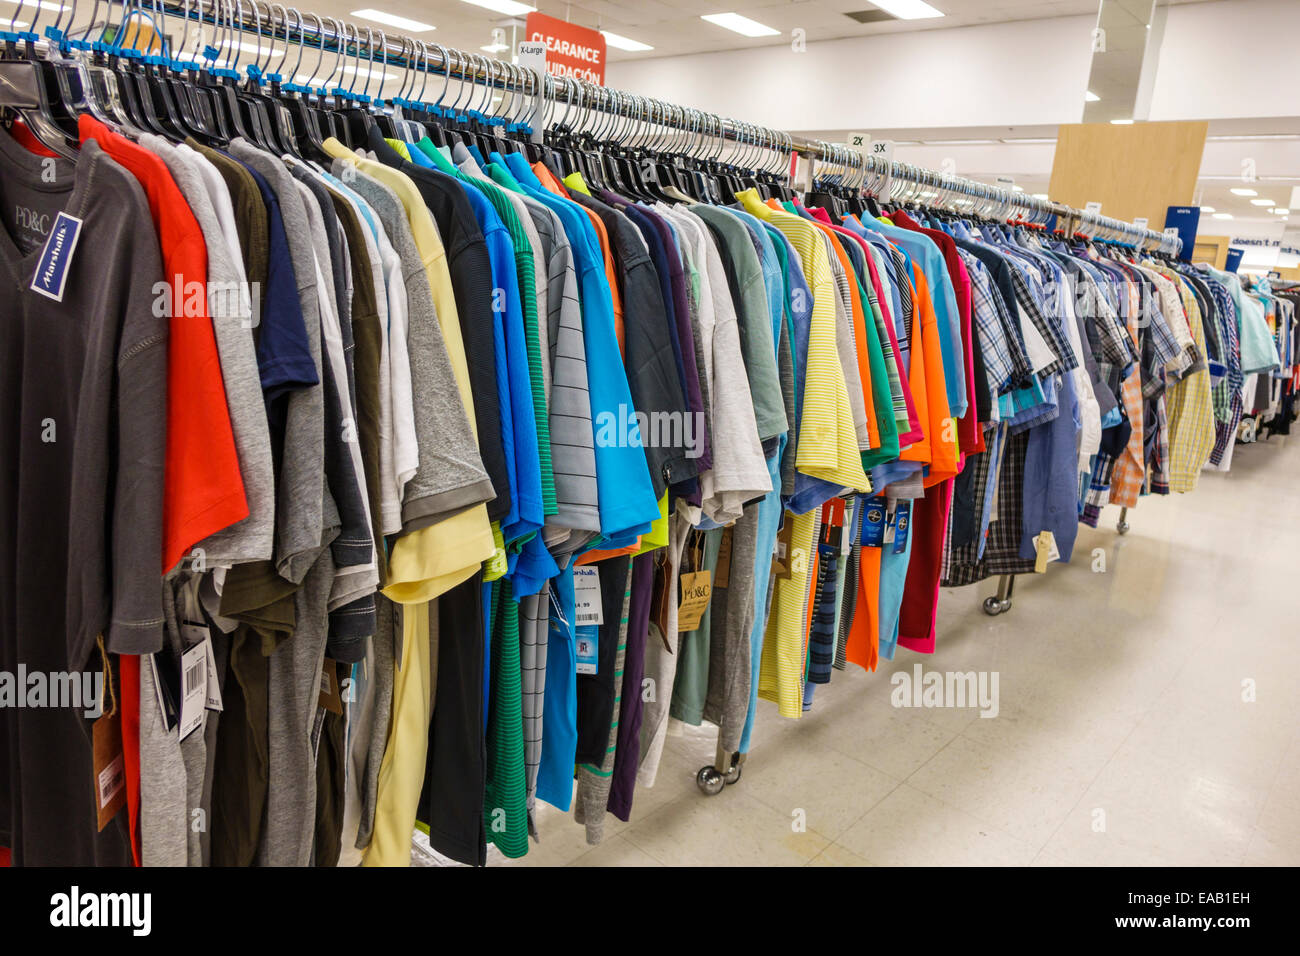 Miami Florida,Marshalls,discount department store,shopping shopper shoppers shop shops market markets marketplace buying selling,retail store stores b Stock Photo